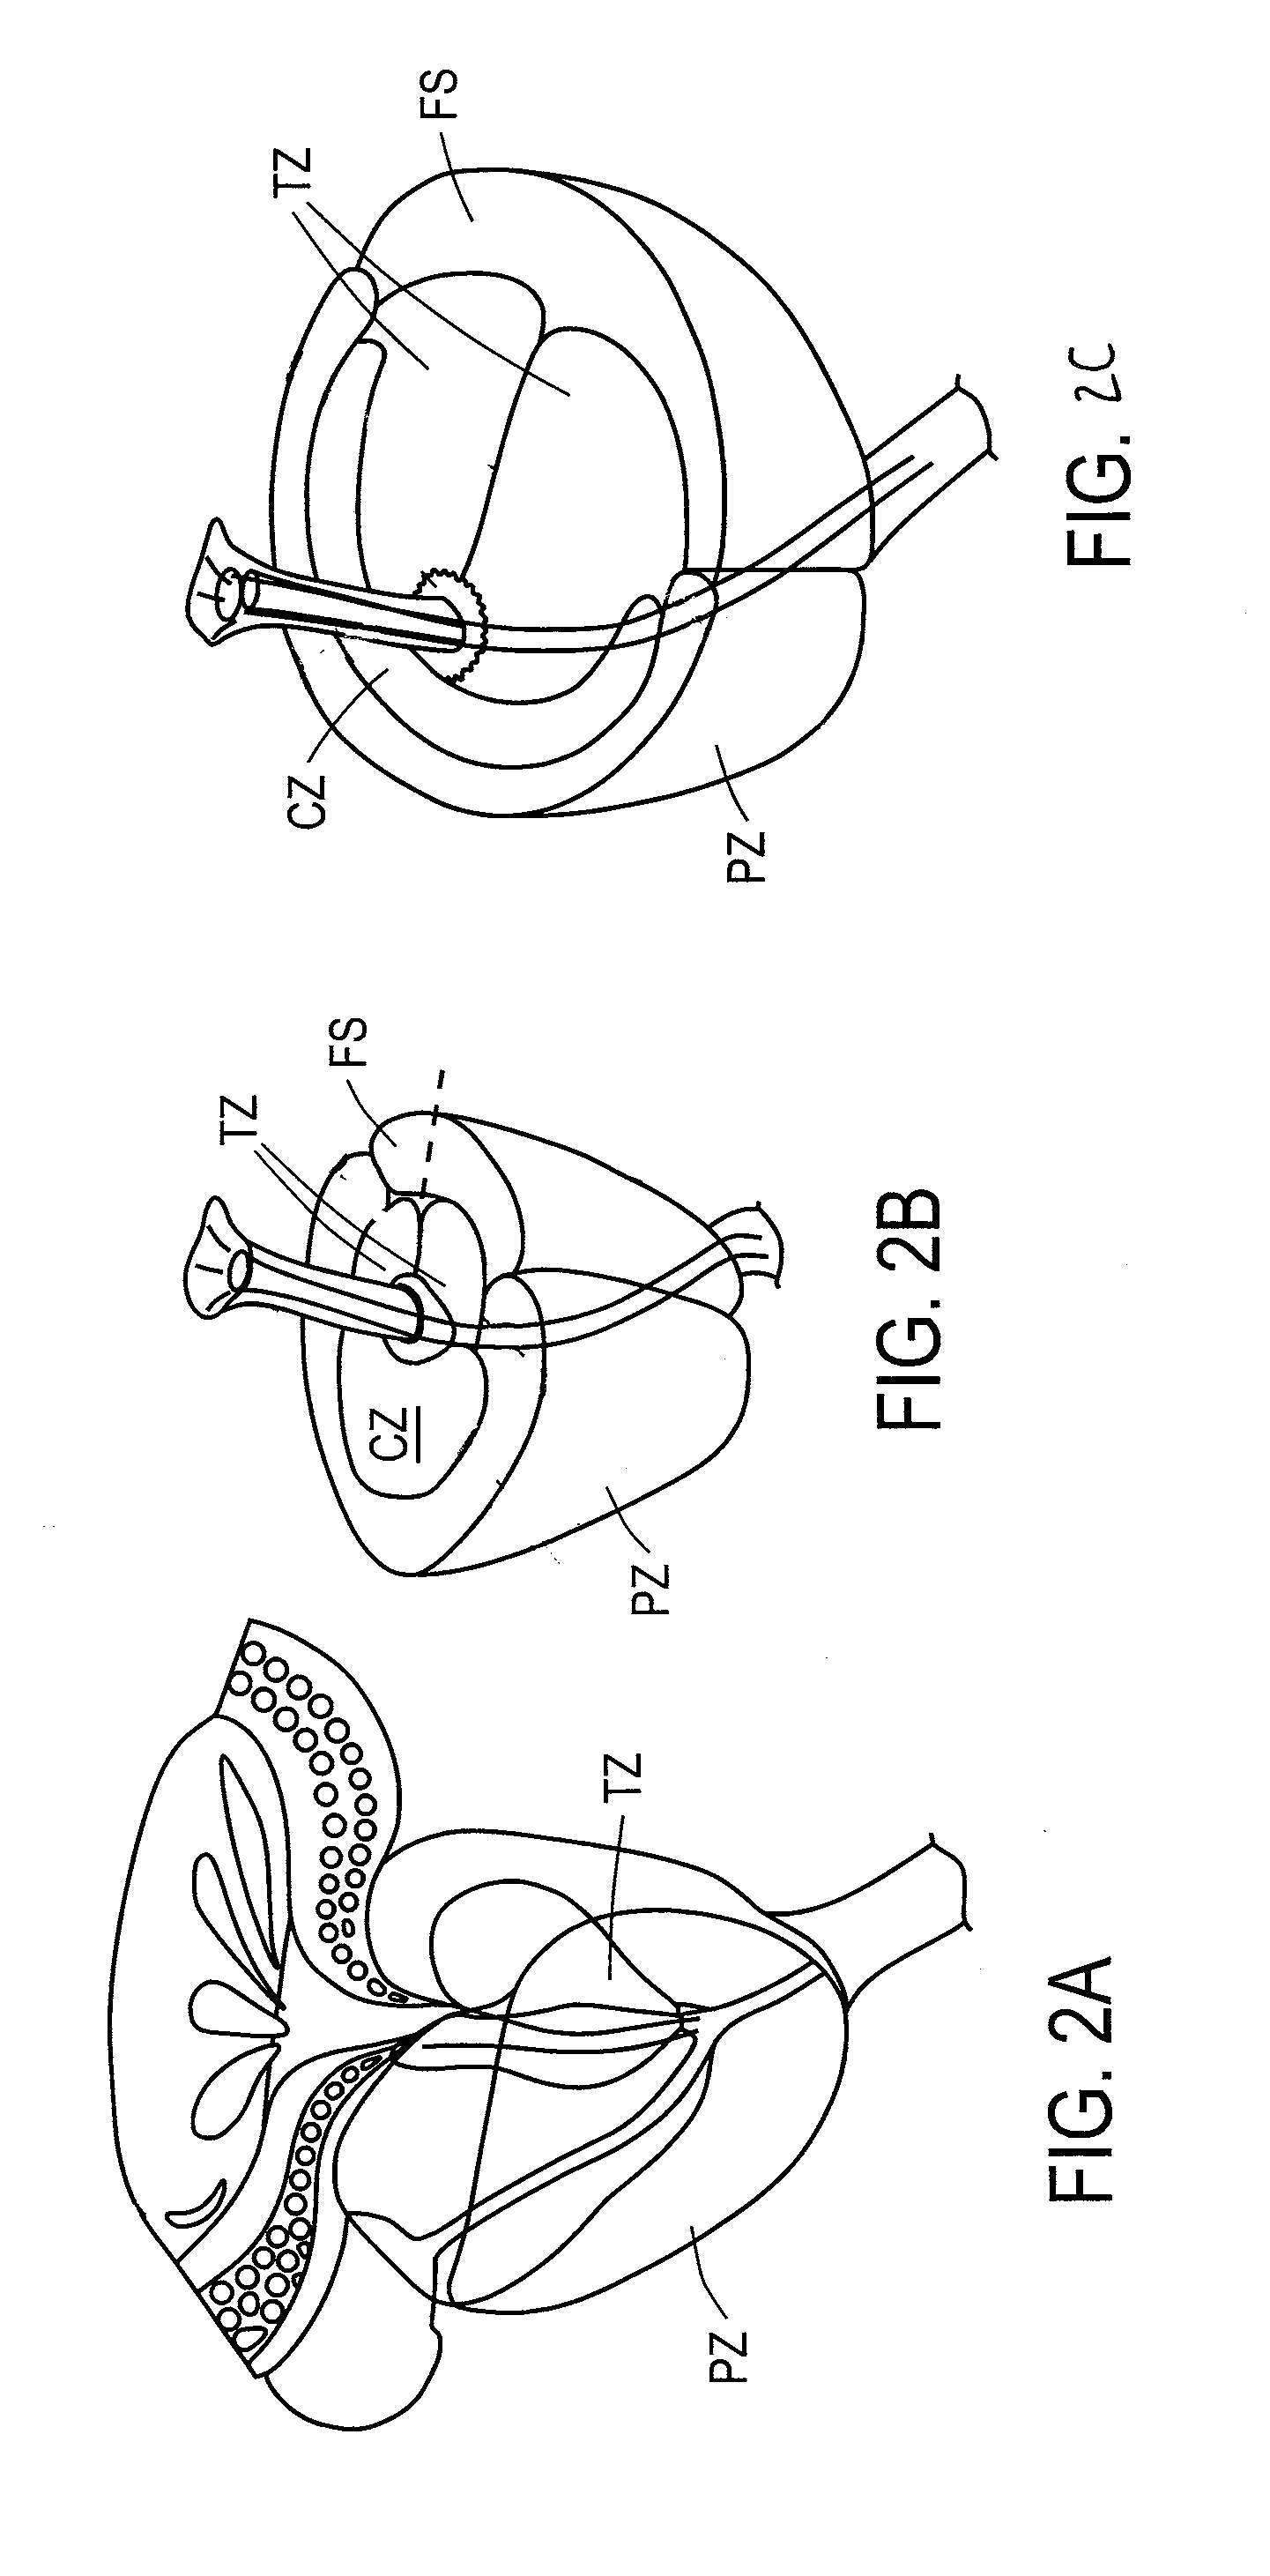 Systems and Methods for Prostate Treatment